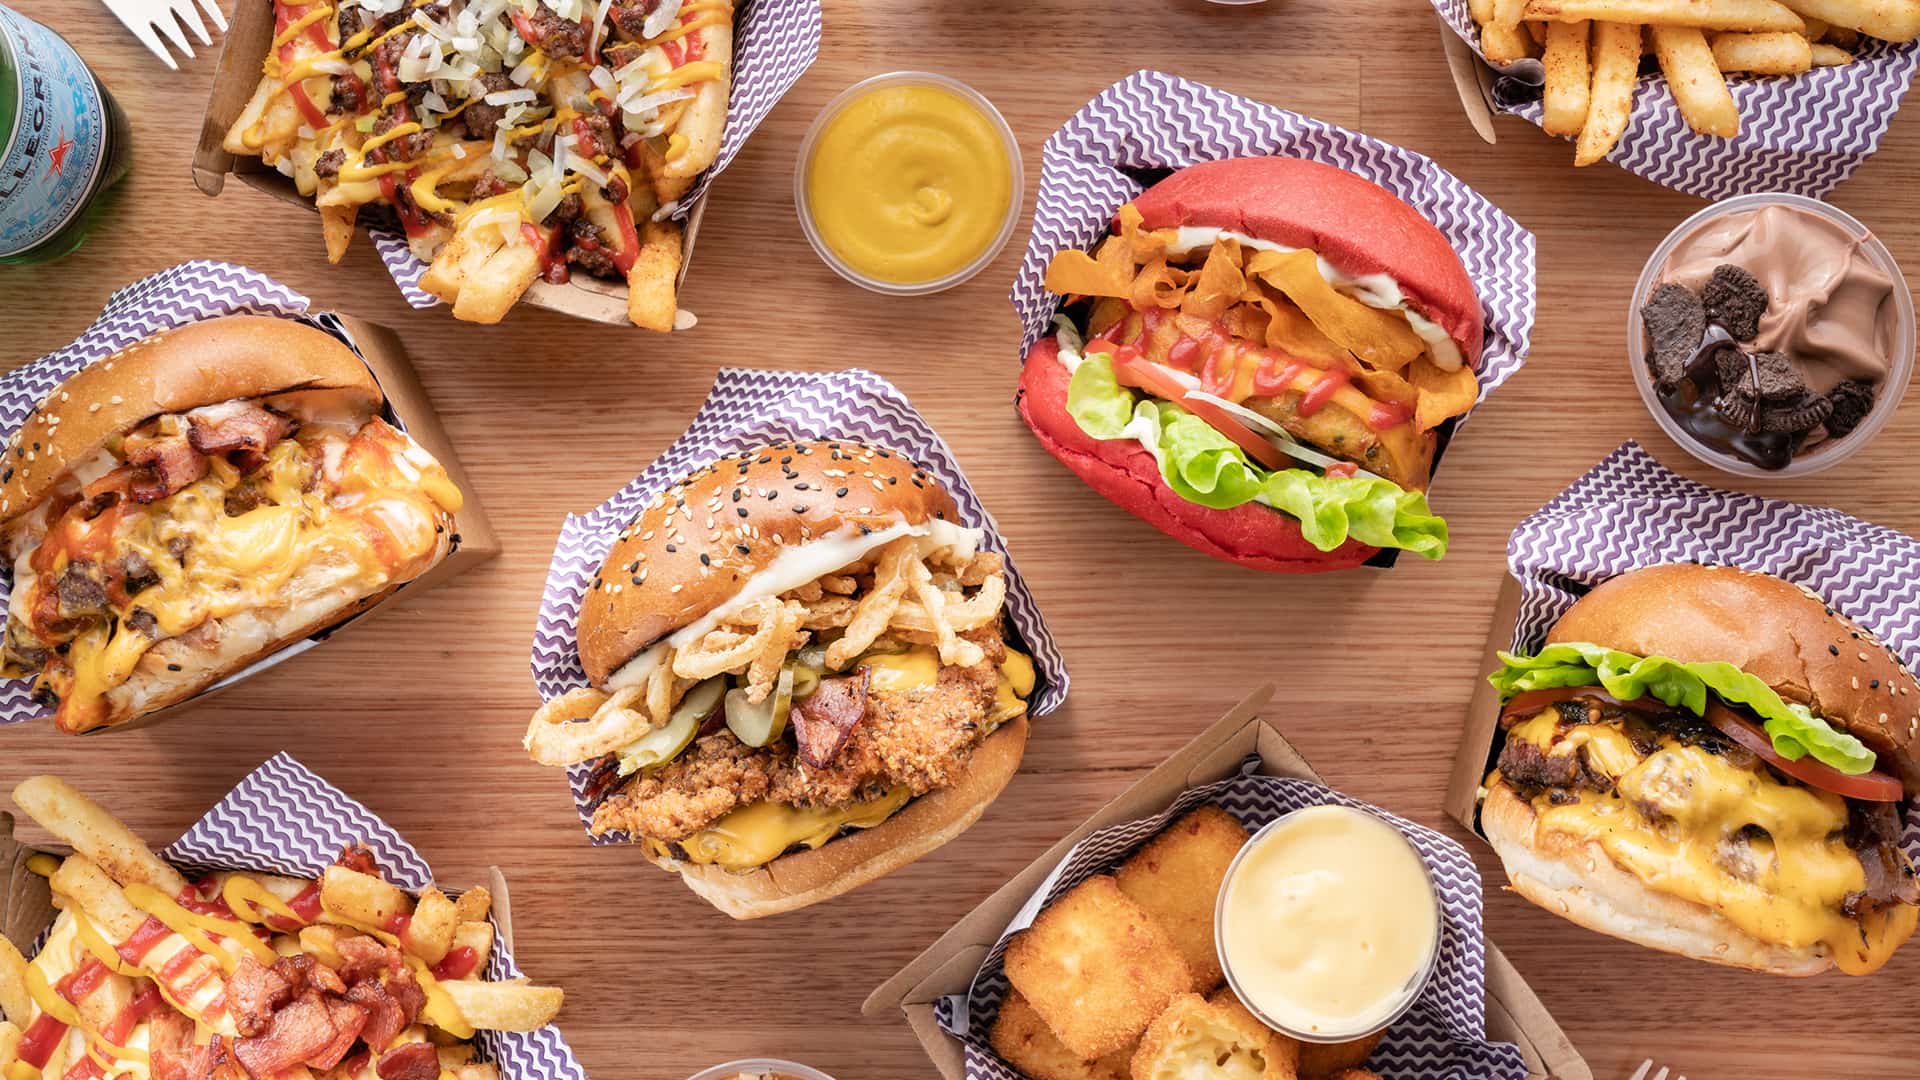 We're Giving Away Free Burgers for a Whole Year to One Lucky Melburnian